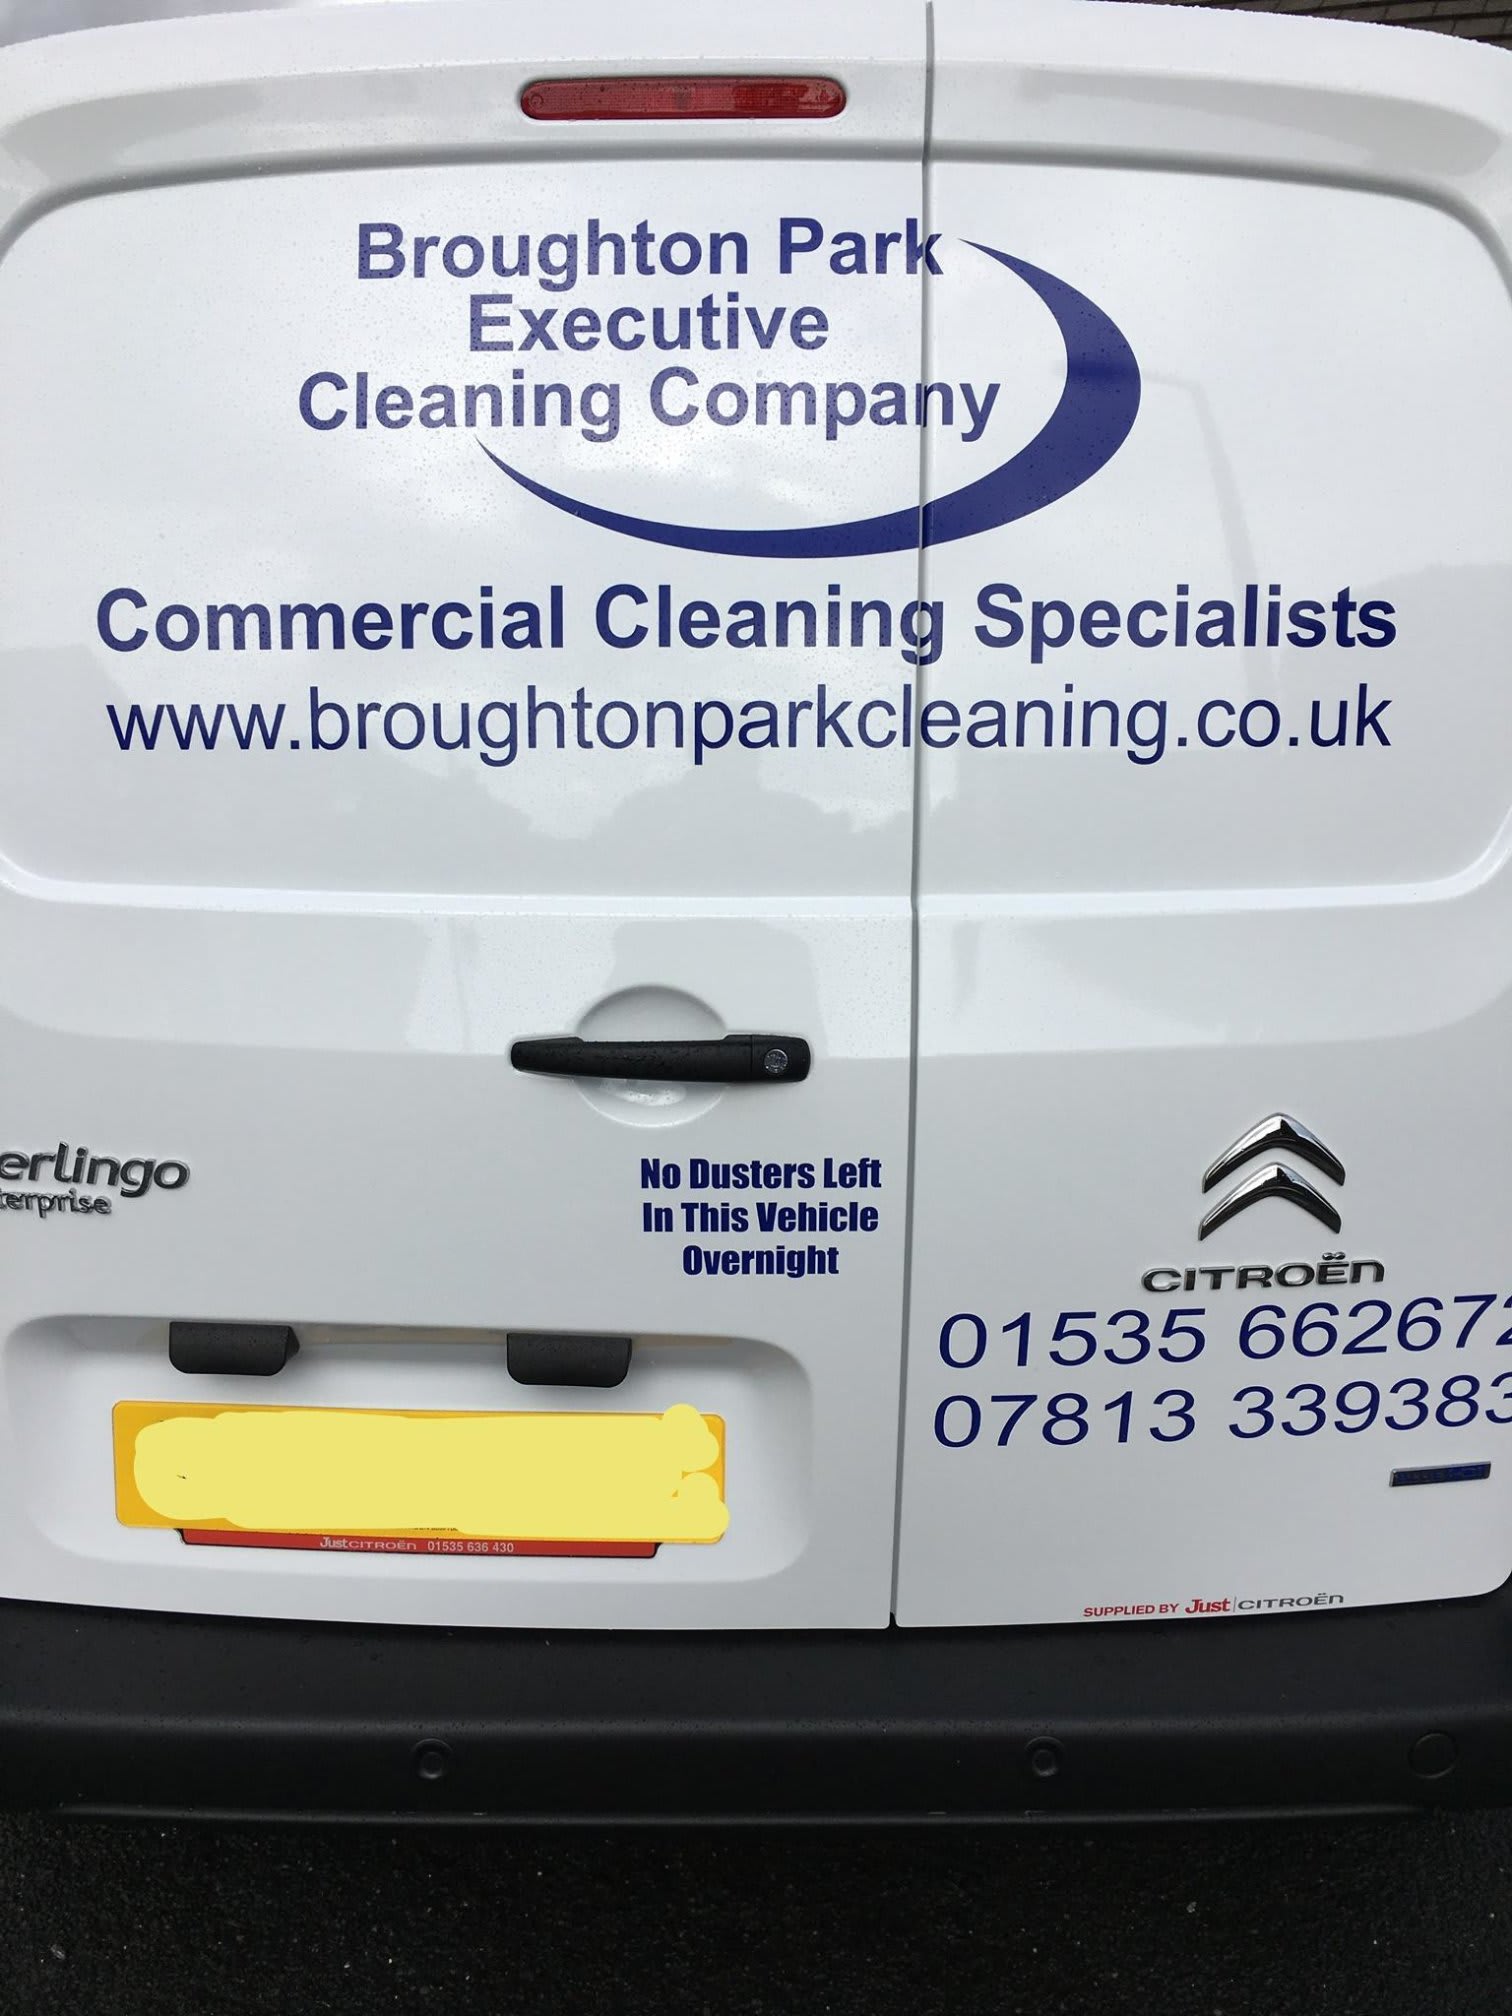 Broughton Park Executive Cleaning Company Keighley 01535 662672